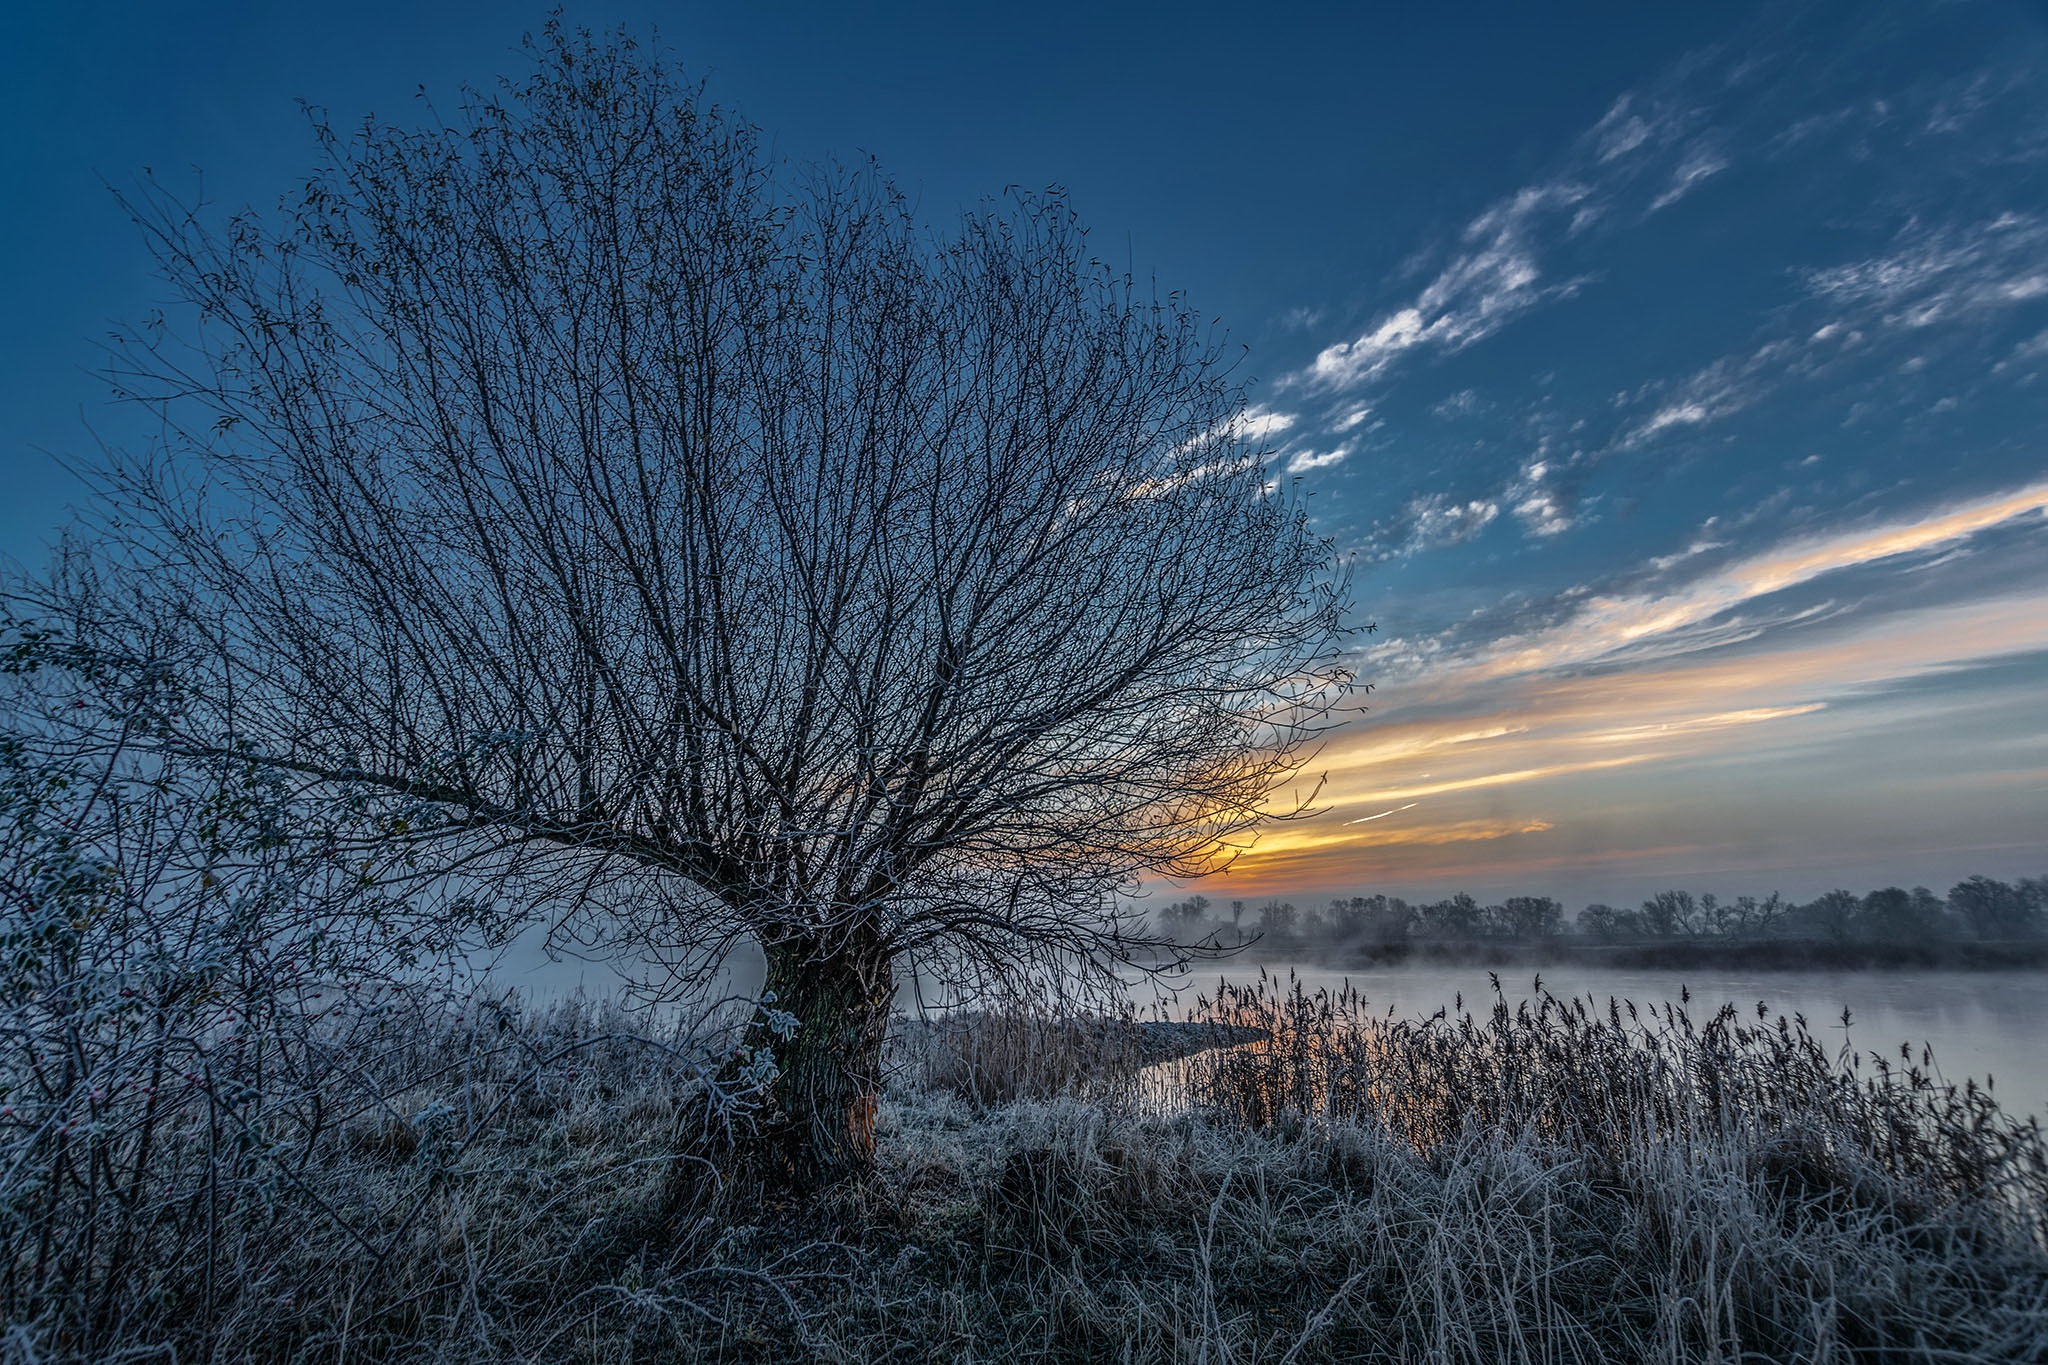 General 2048x1365 nature cold winter sunset outdoors trees